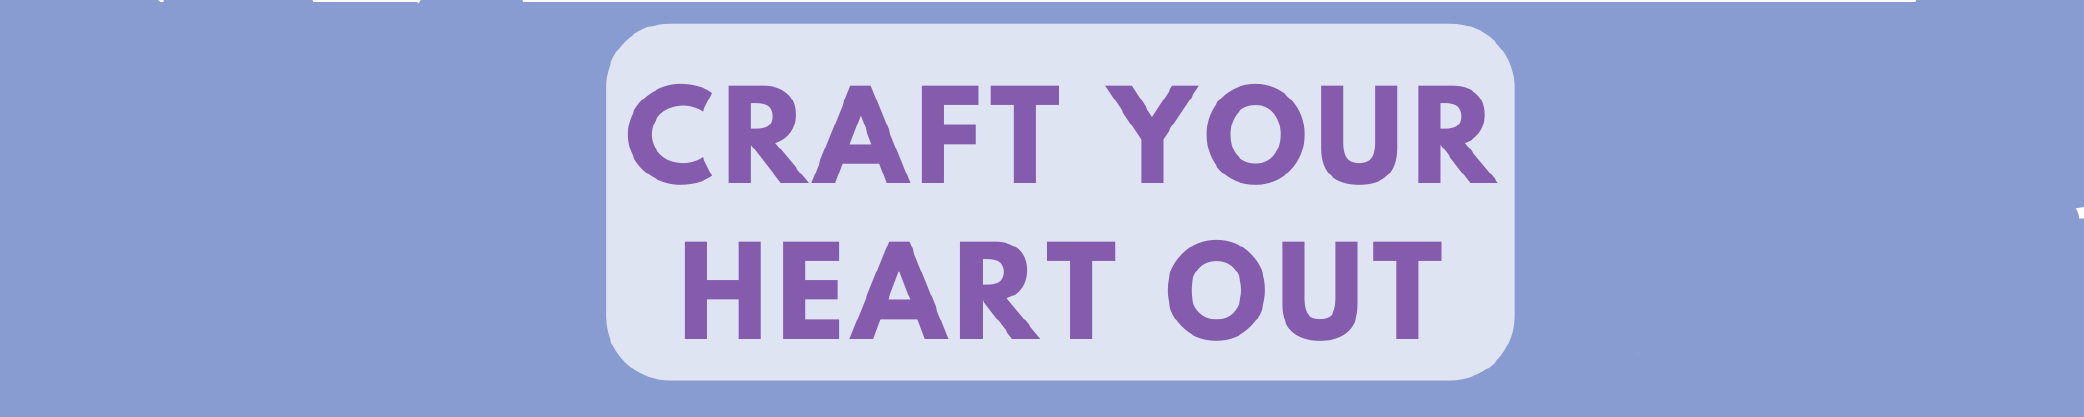 Craft Your Heart Out